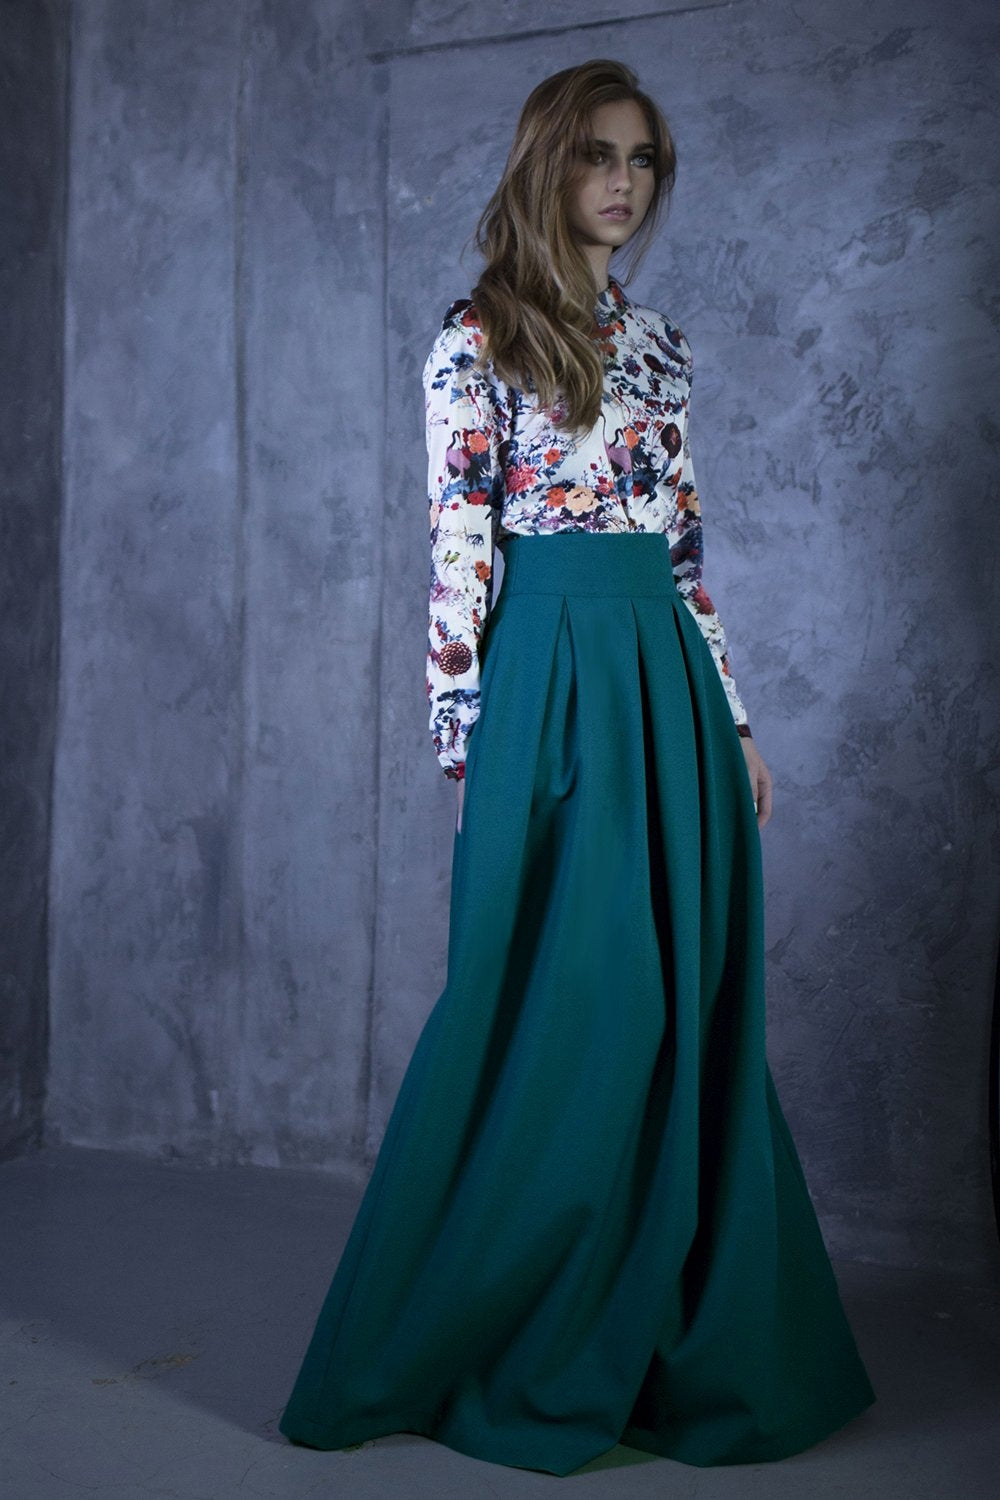 Blue green full maxi skirts with side pockets